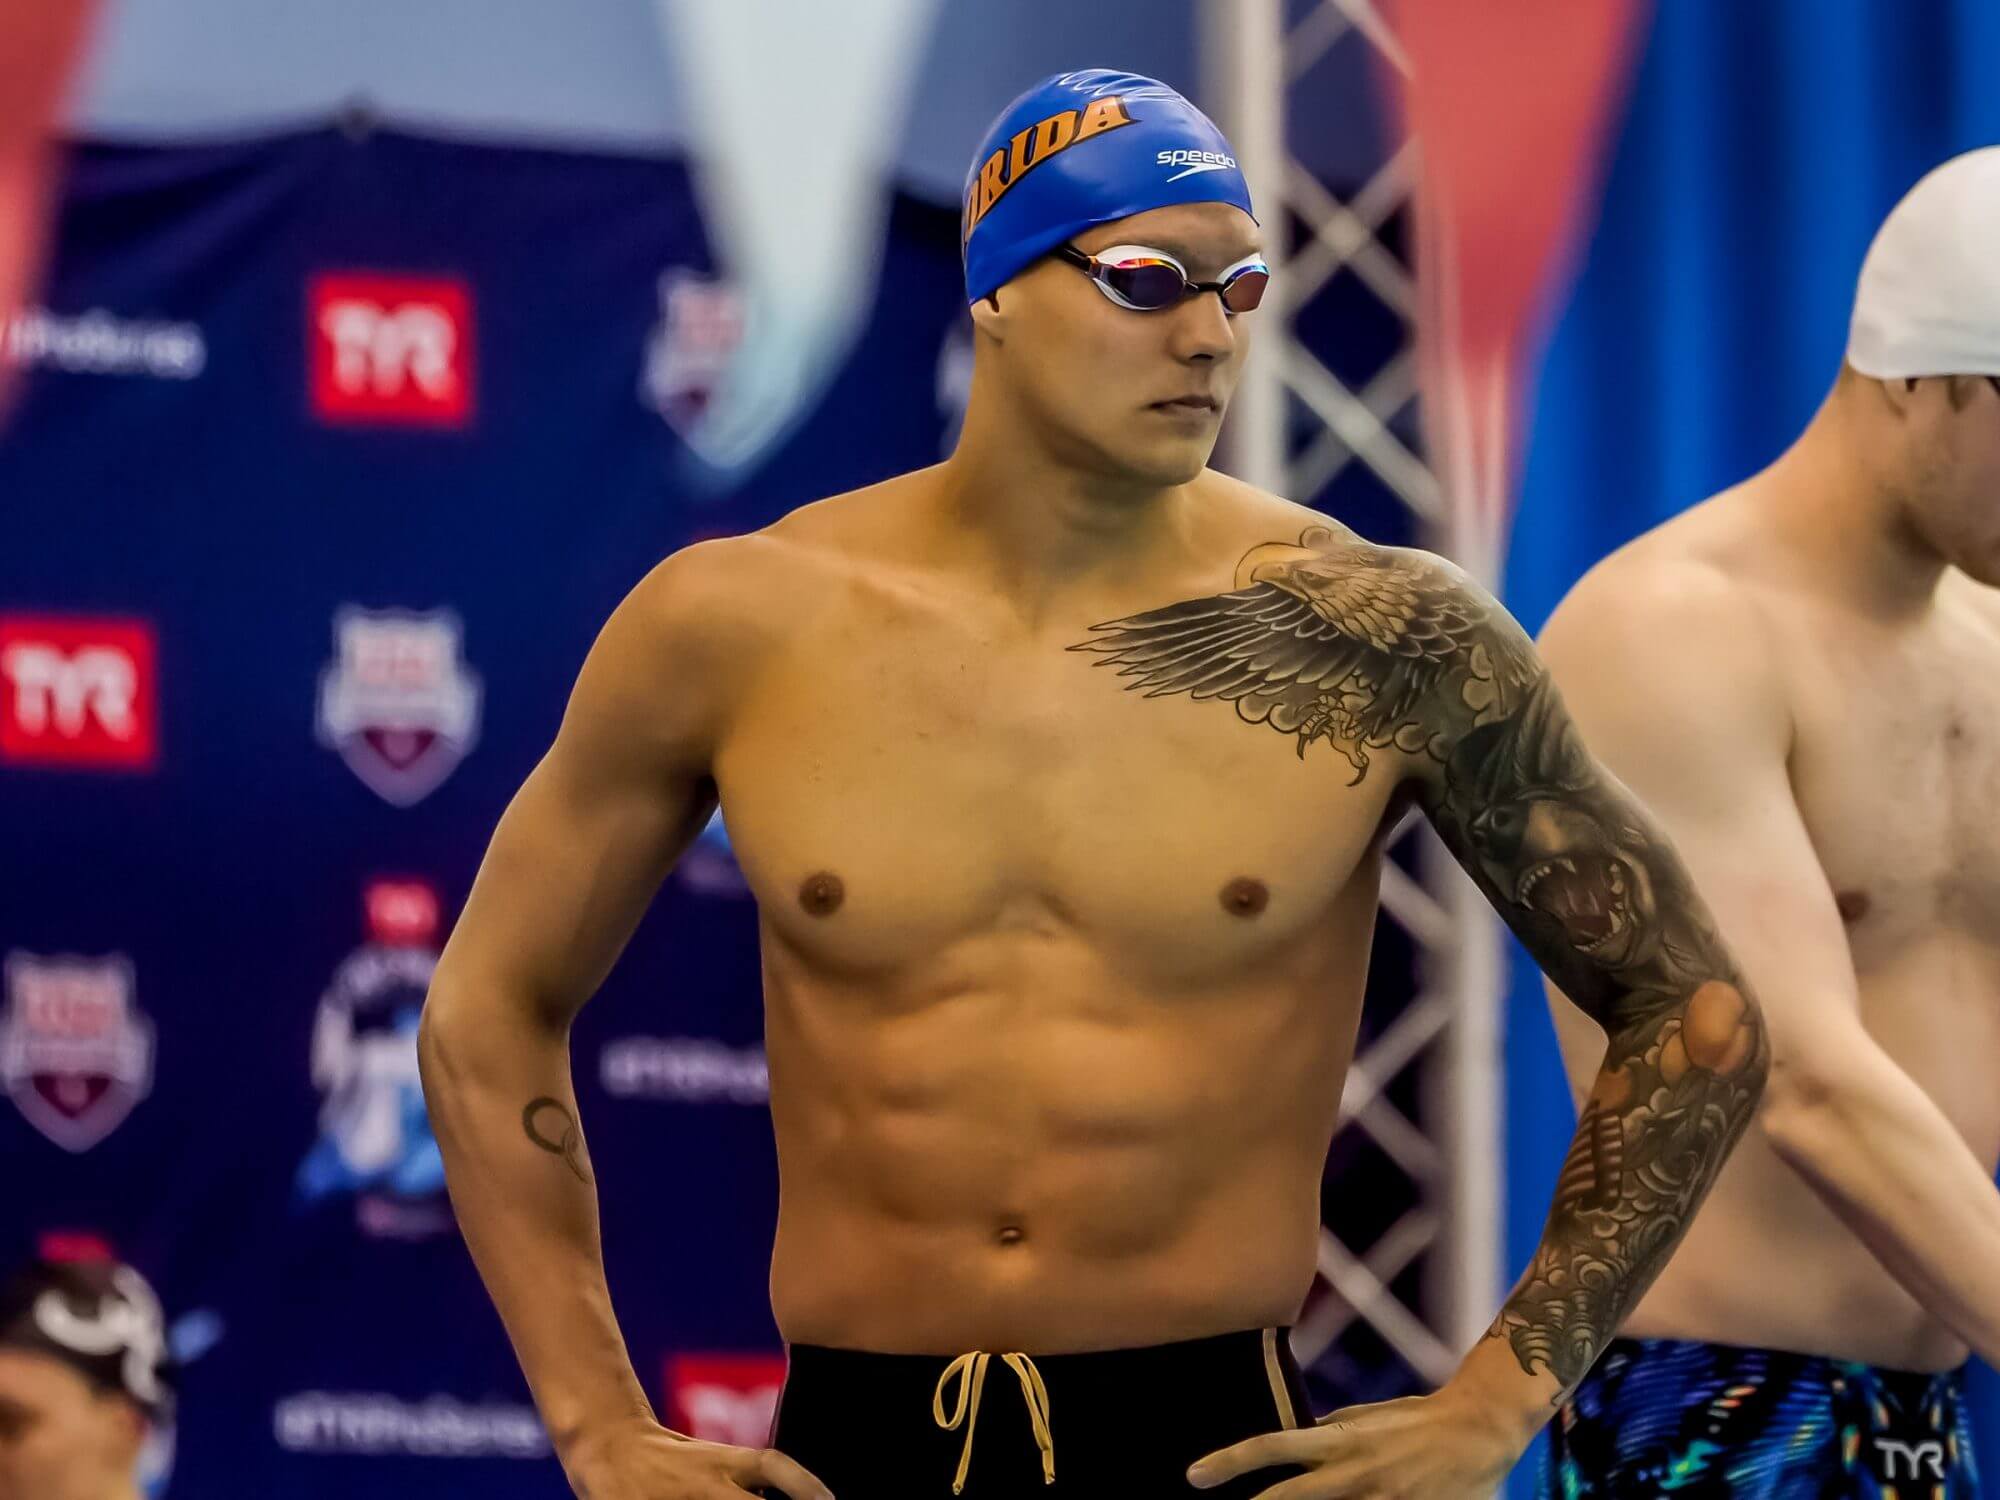 Caeleb Dressel Wraps Up ISCA Senior Cup With 100 Free/200 Fly Double